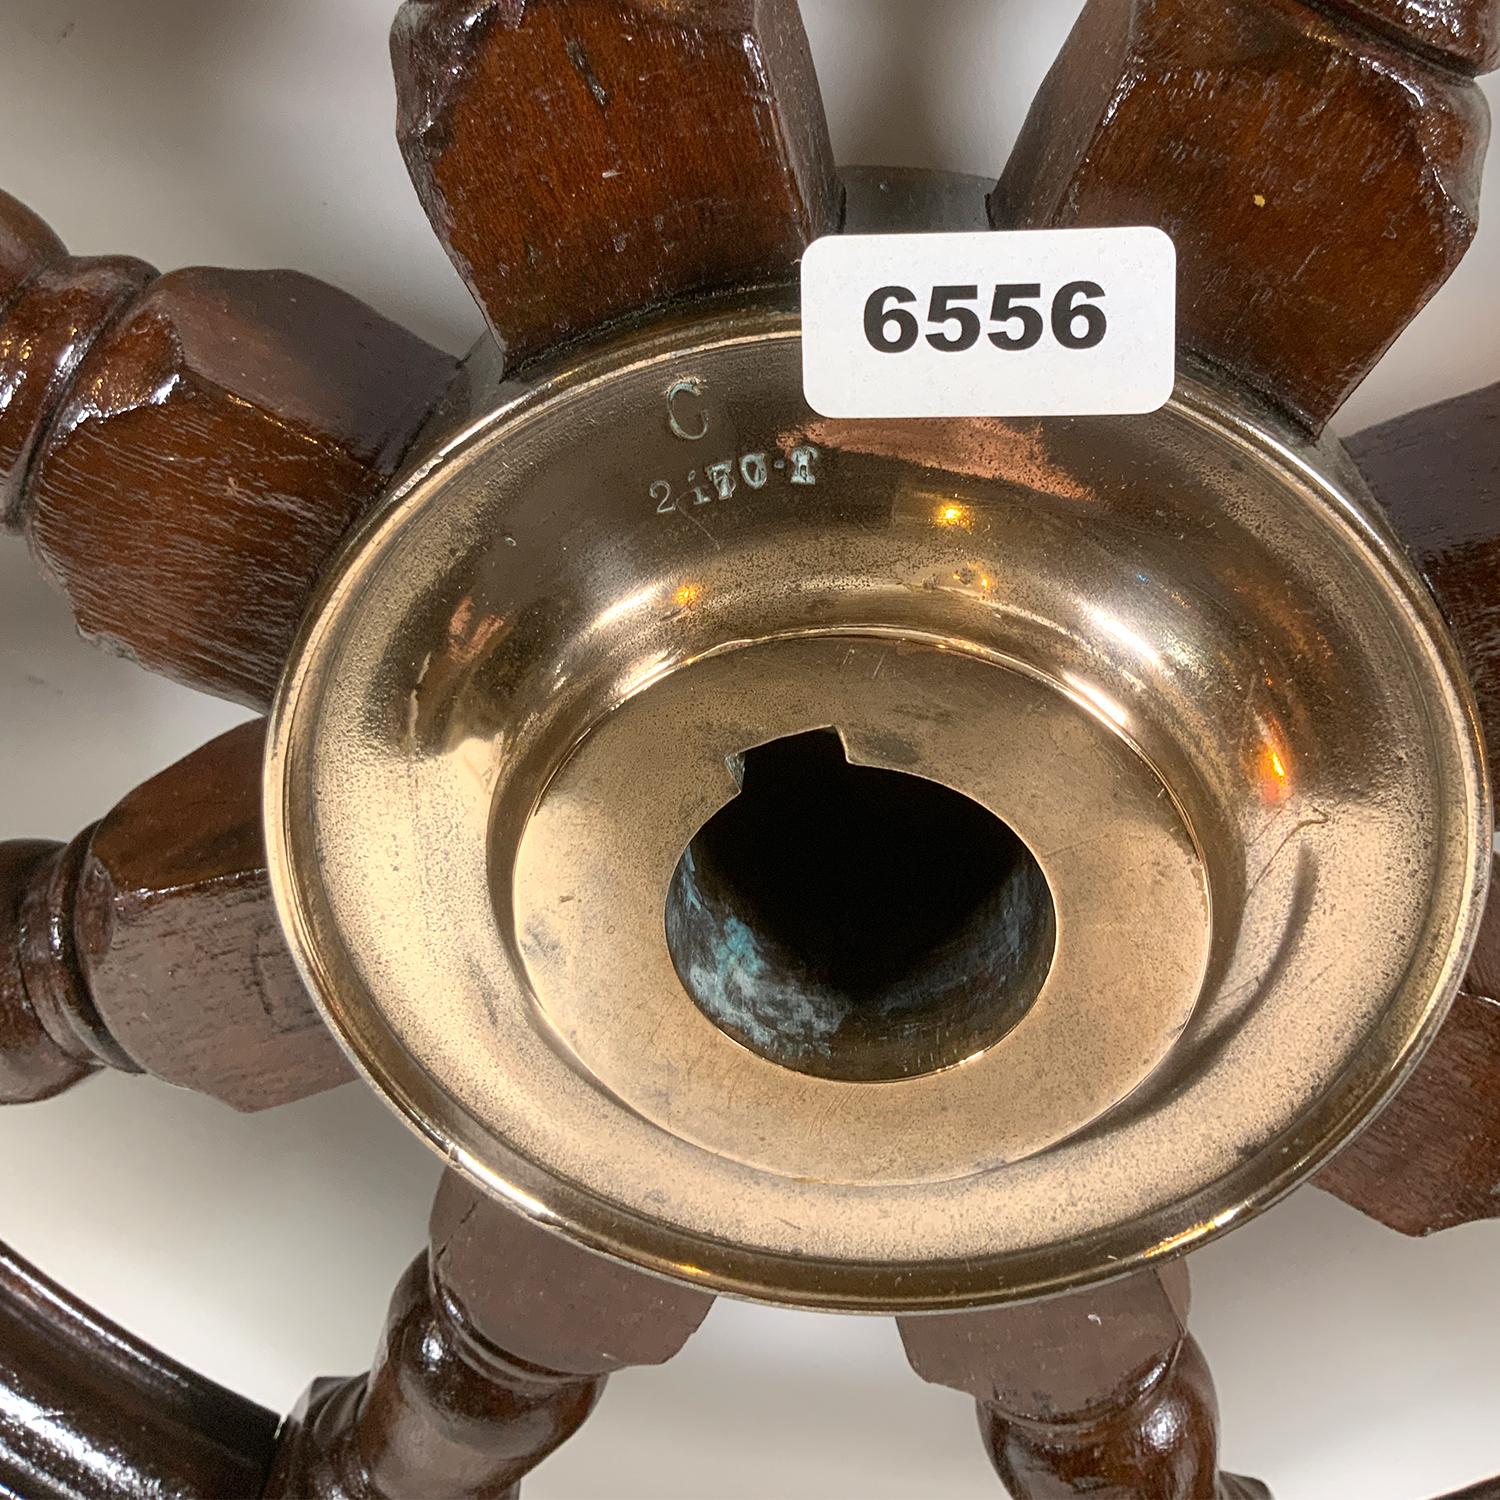 Fine late nineteenth century ships or yacht wheel. Very fine varnish finish. The brass trim ring and center hub have been meticulously polished. Brass acorn cap on one of the eight turned spindles.